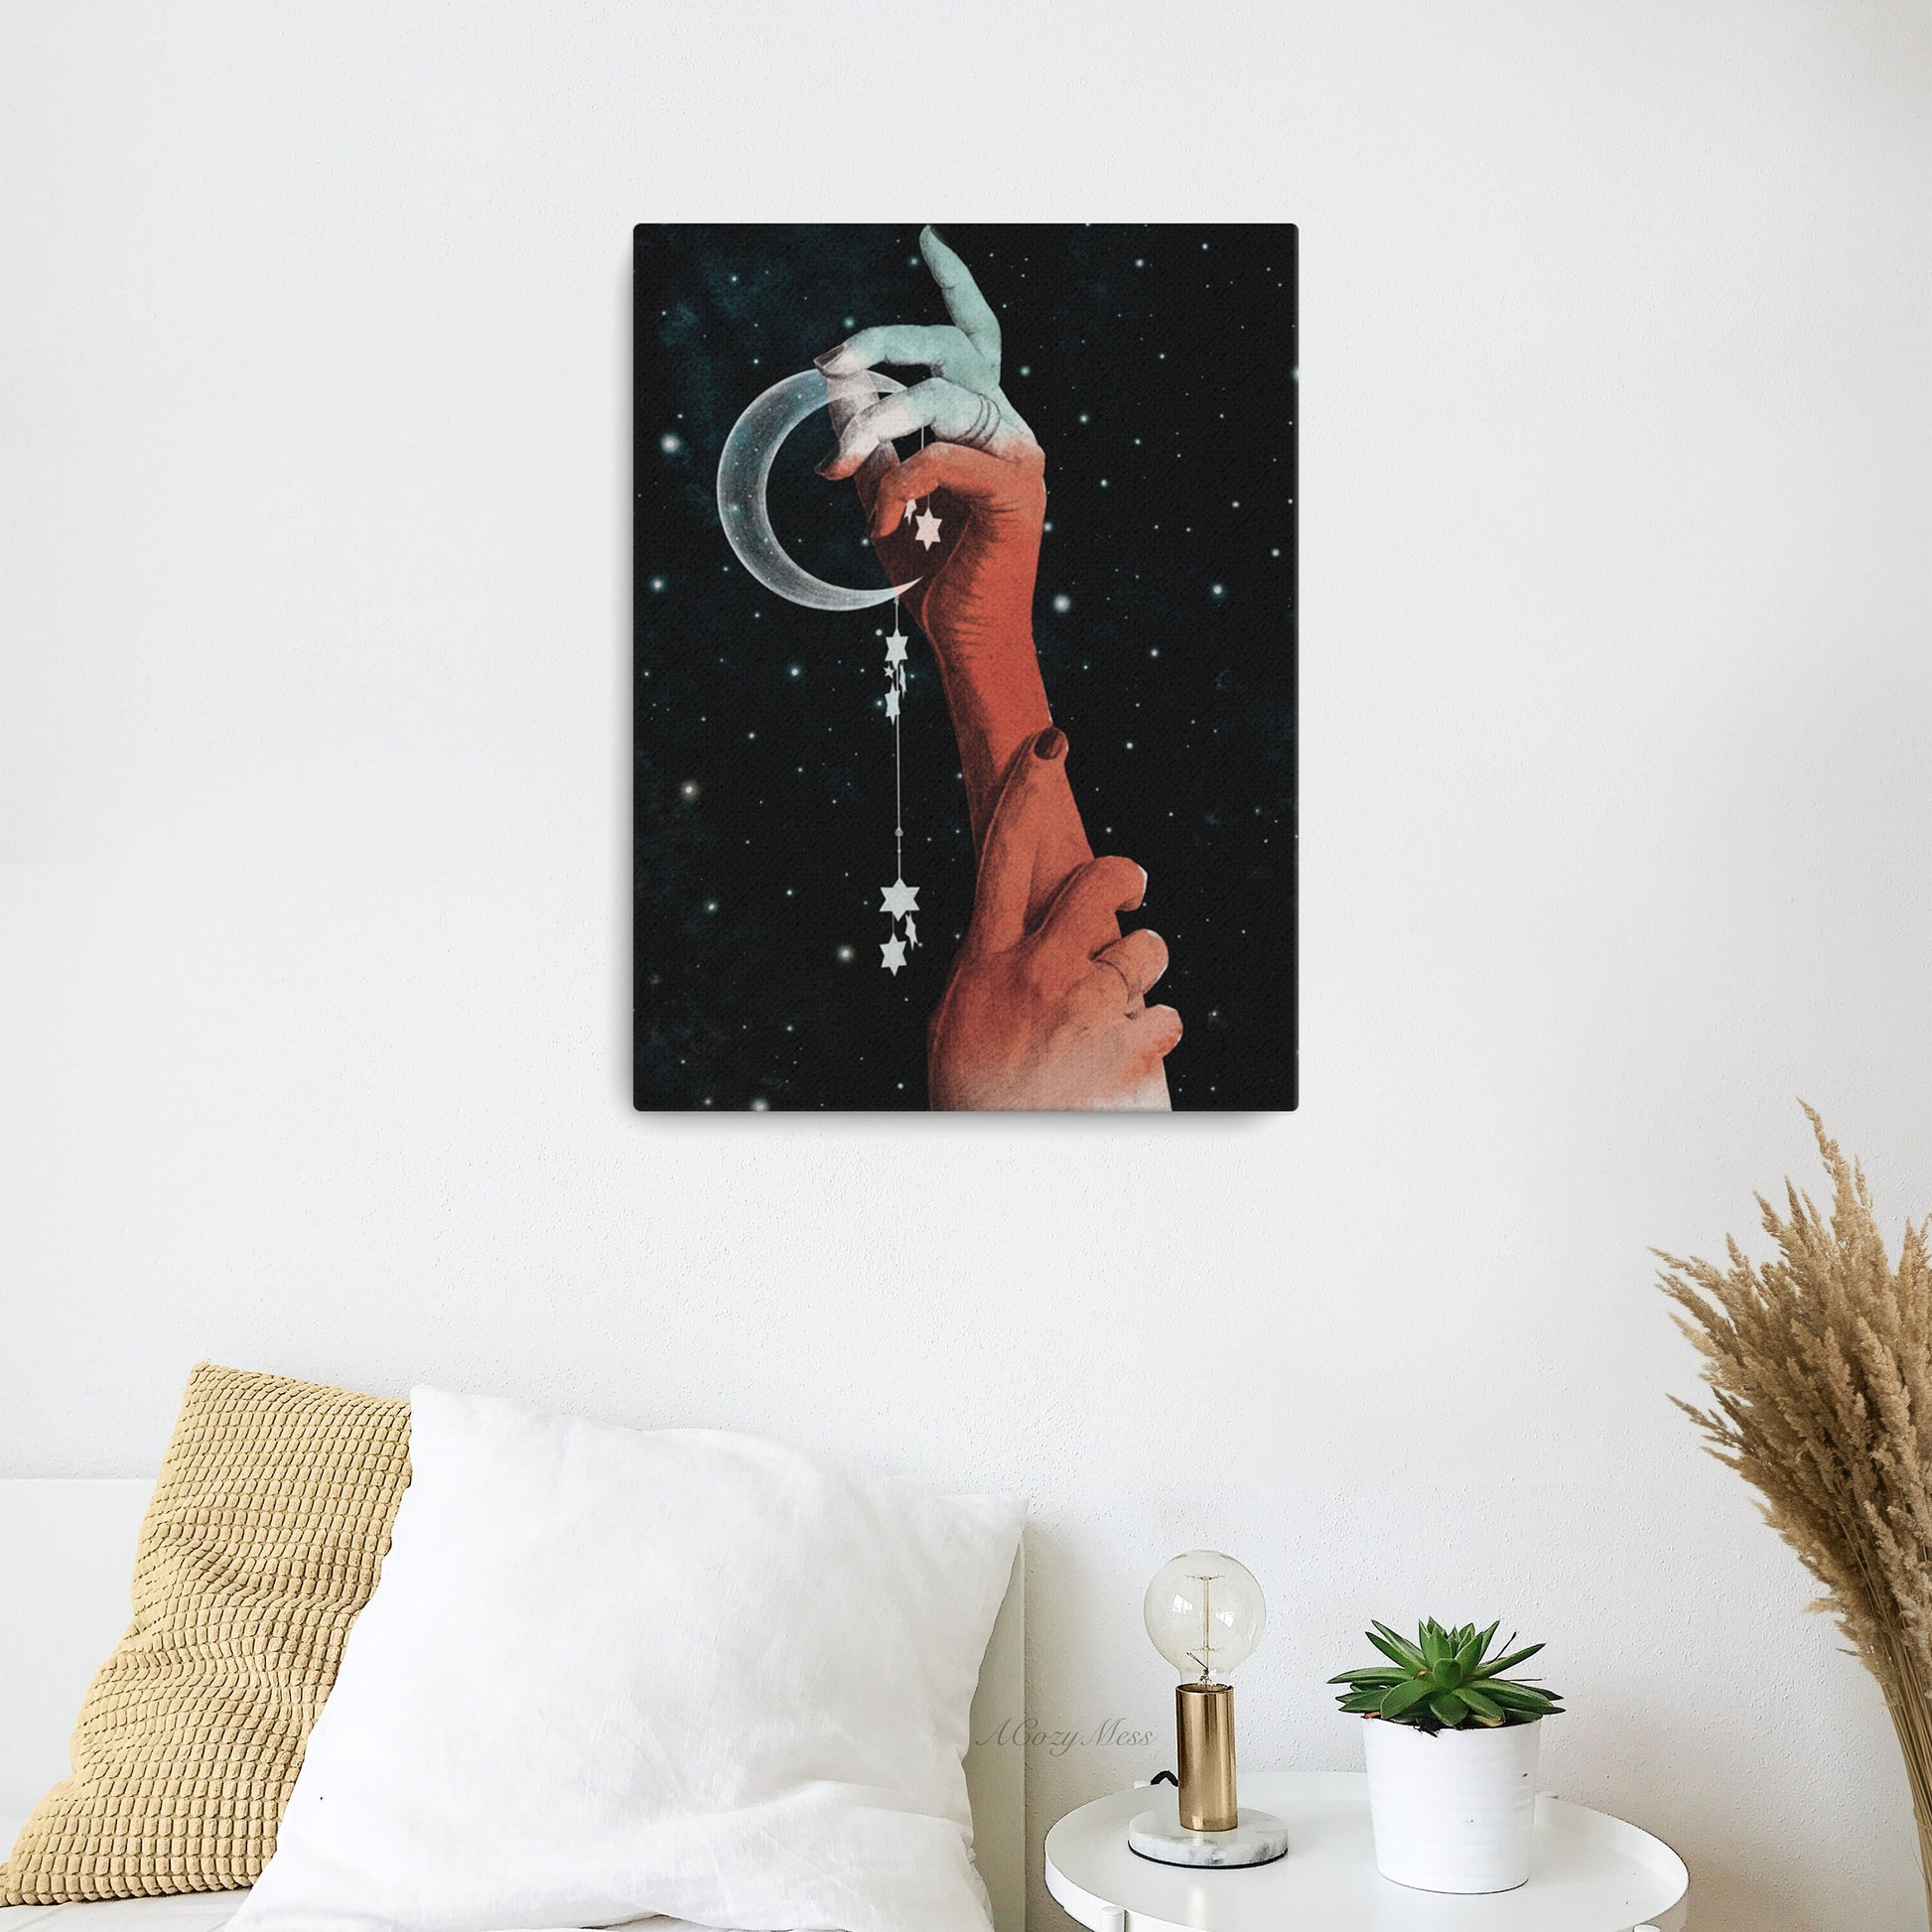 Make All Your Wishes Come True, Celestial Wall Art Poster